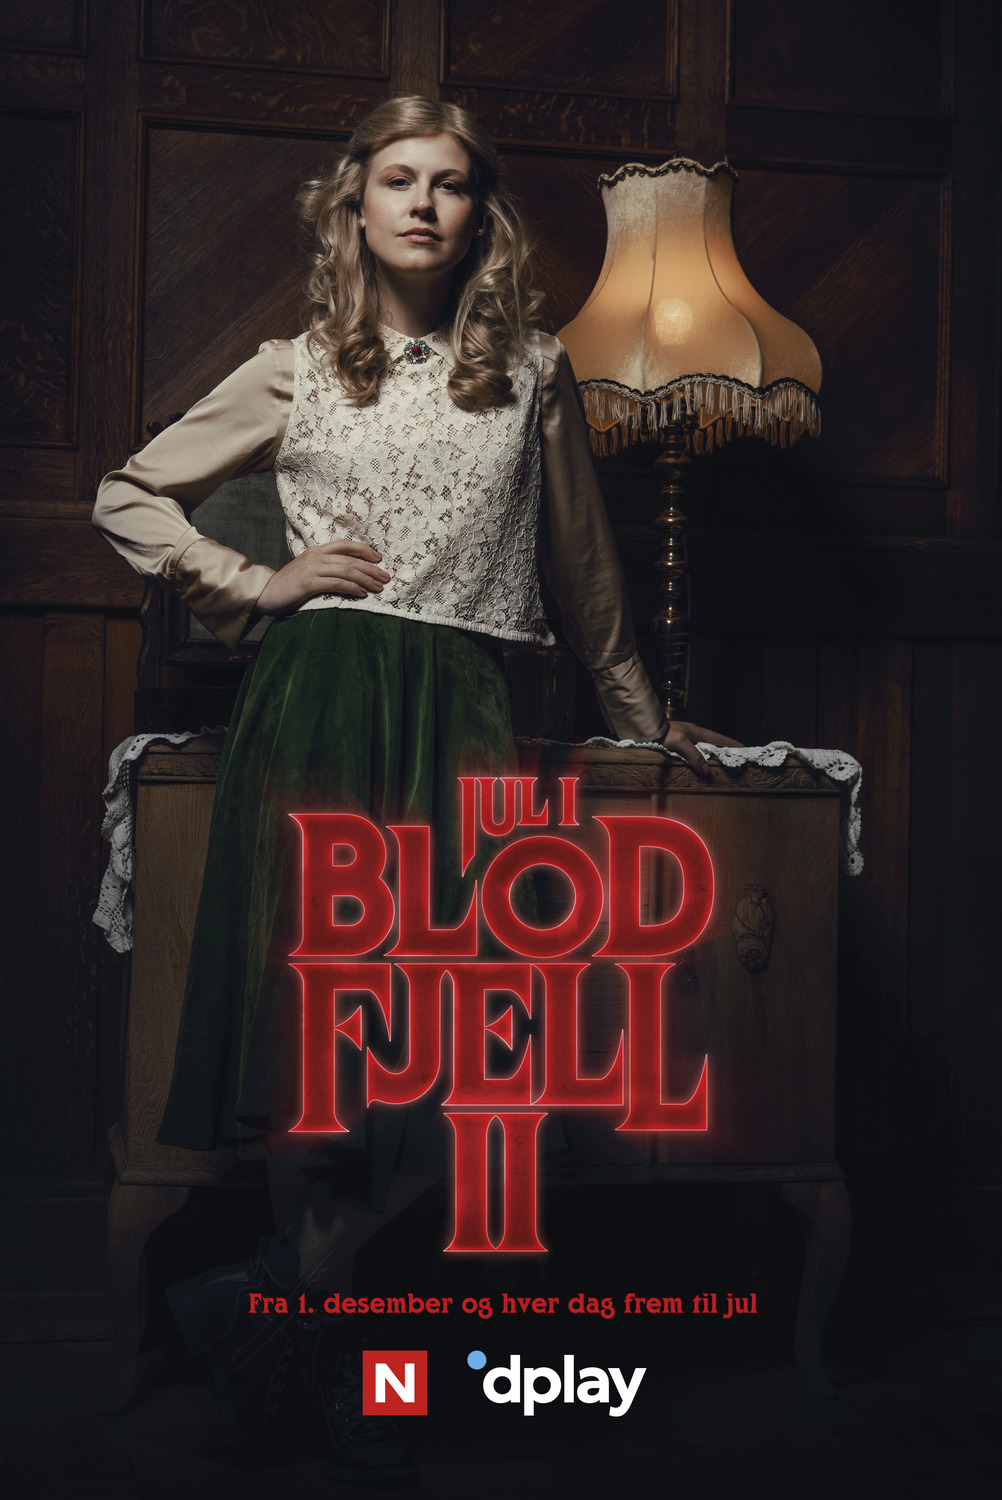 Extra Large TV Poster Image for Jul i Blodfjell (#8 of 11)